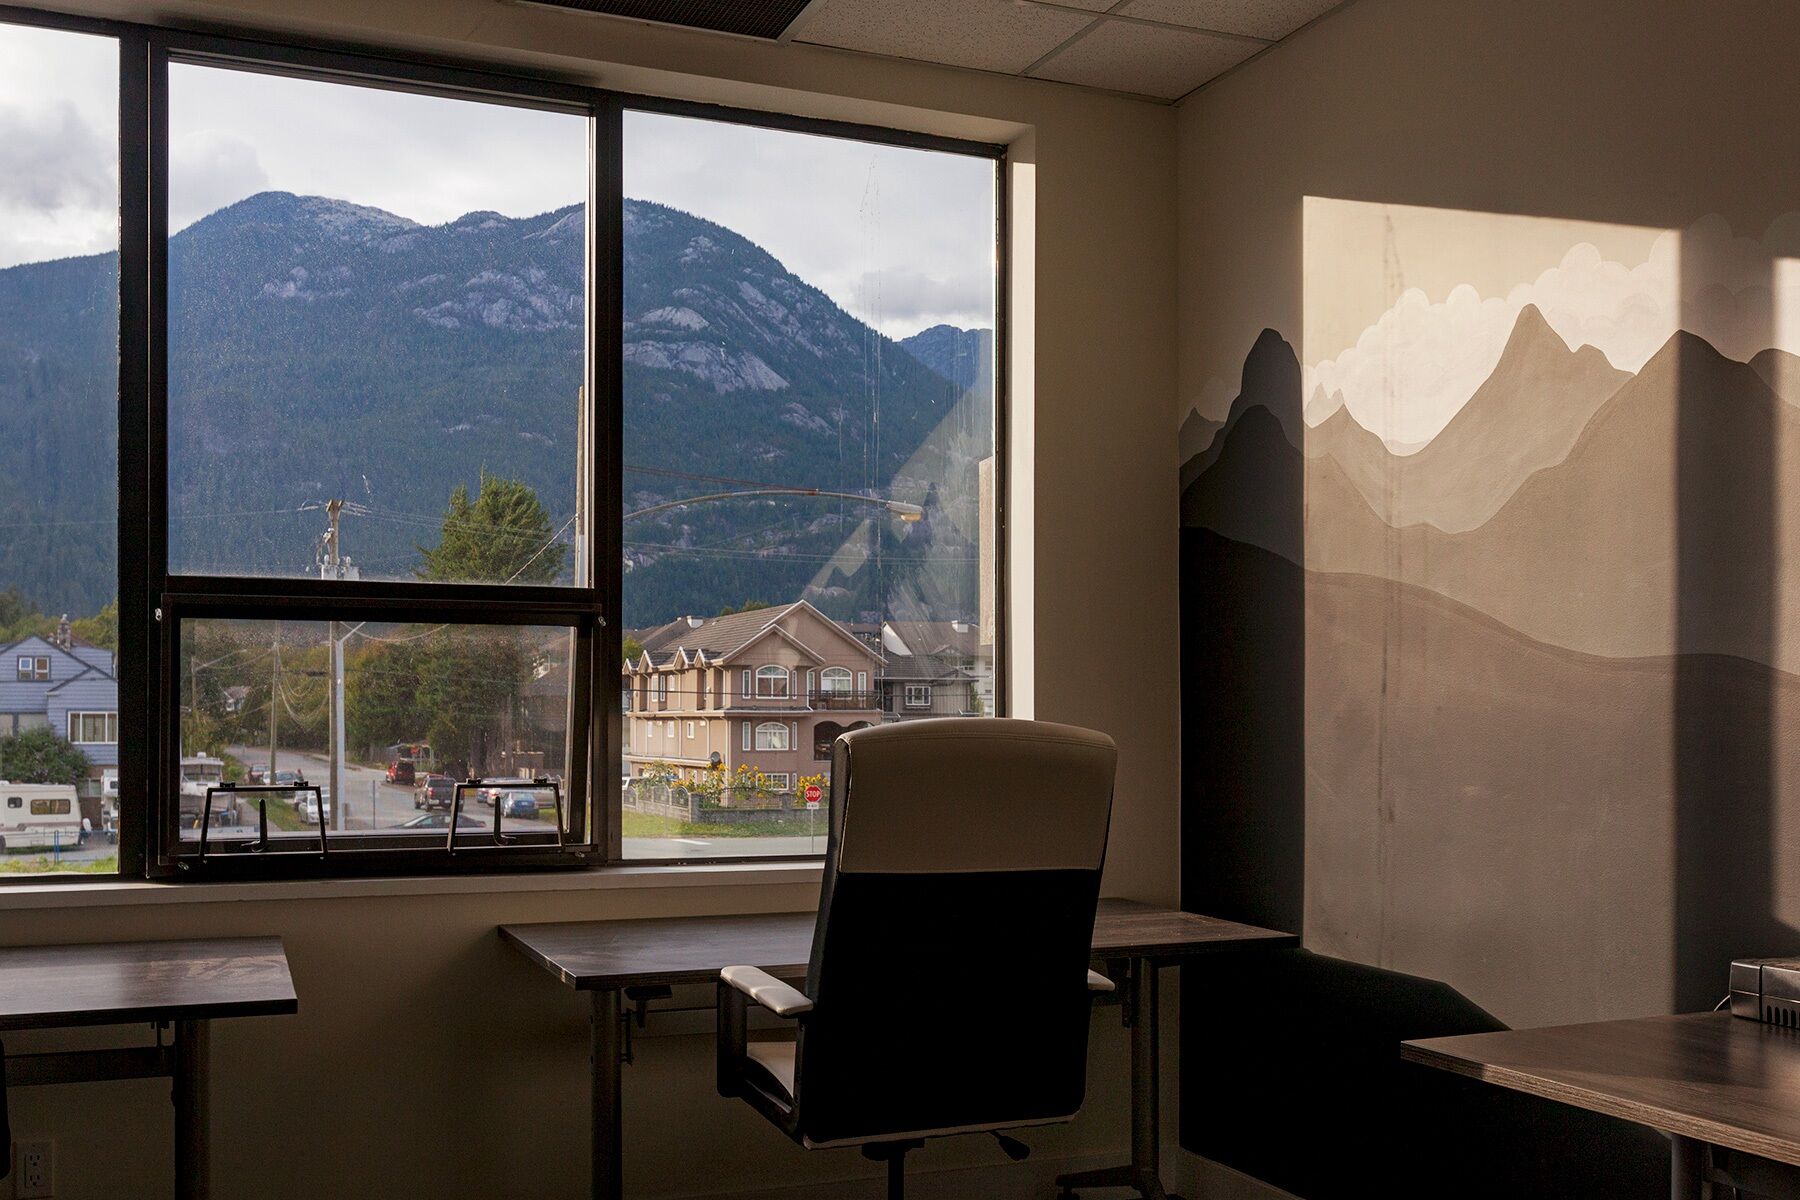 View of the mountains of Squamish, B.C., Canada, from an office